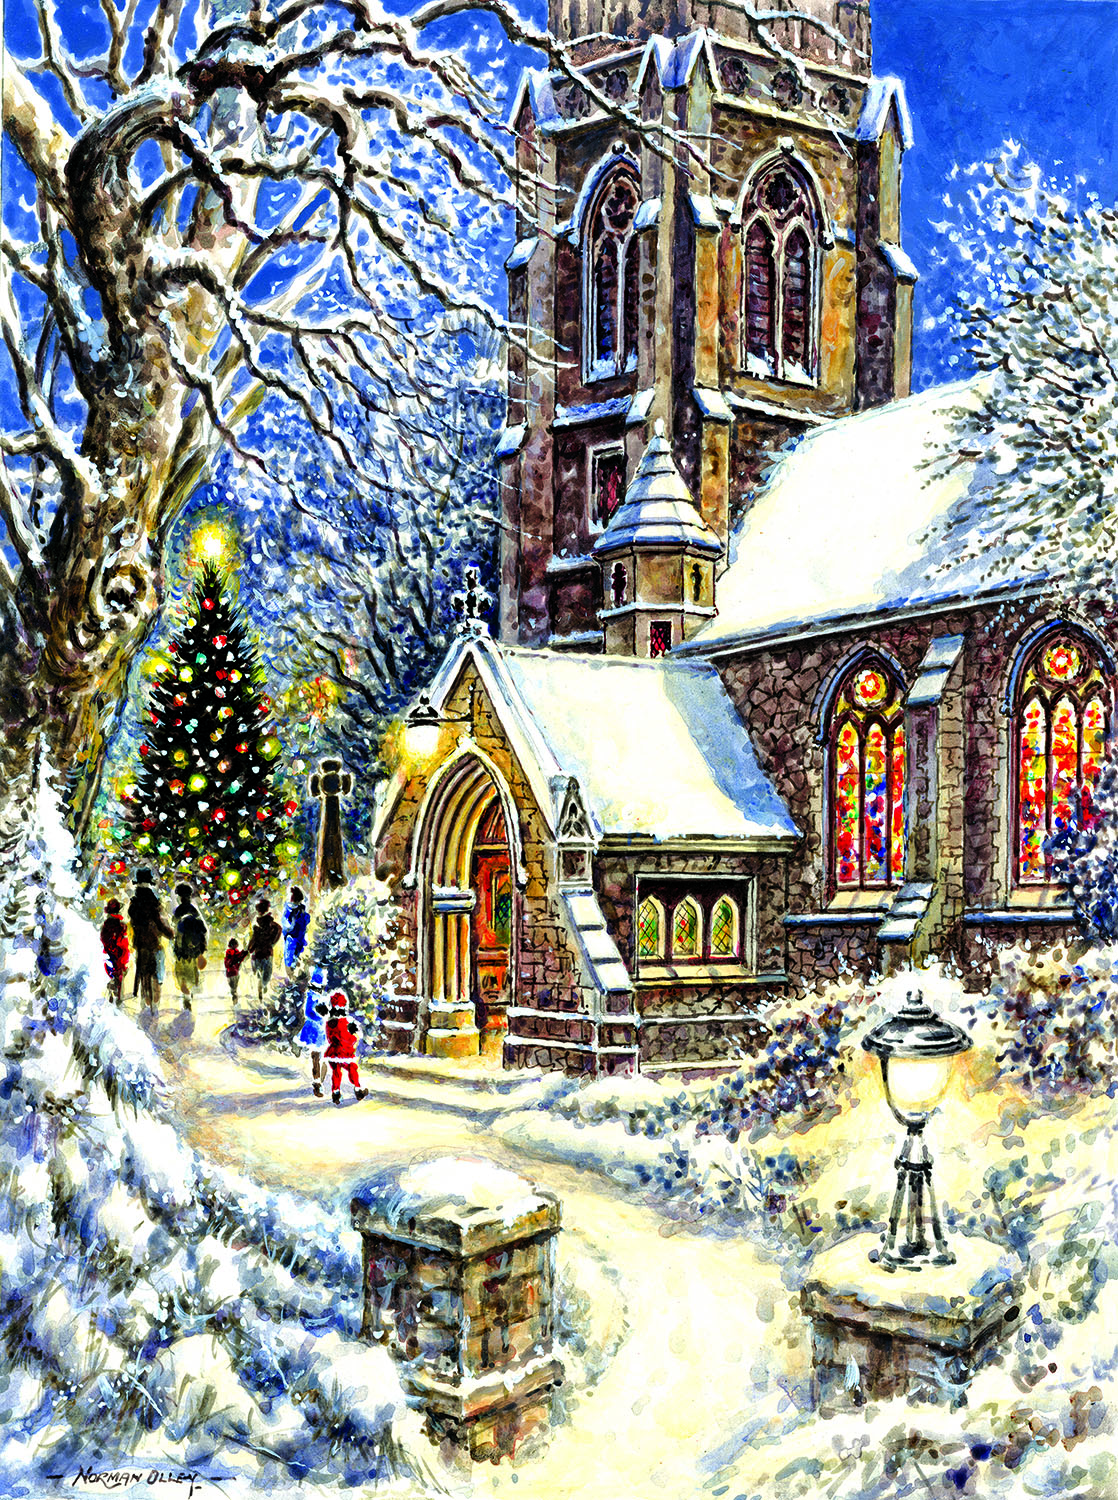 SunsOut Puzzle - #44131 Church in the Snow - 1000pc Jigsaw Puzzle